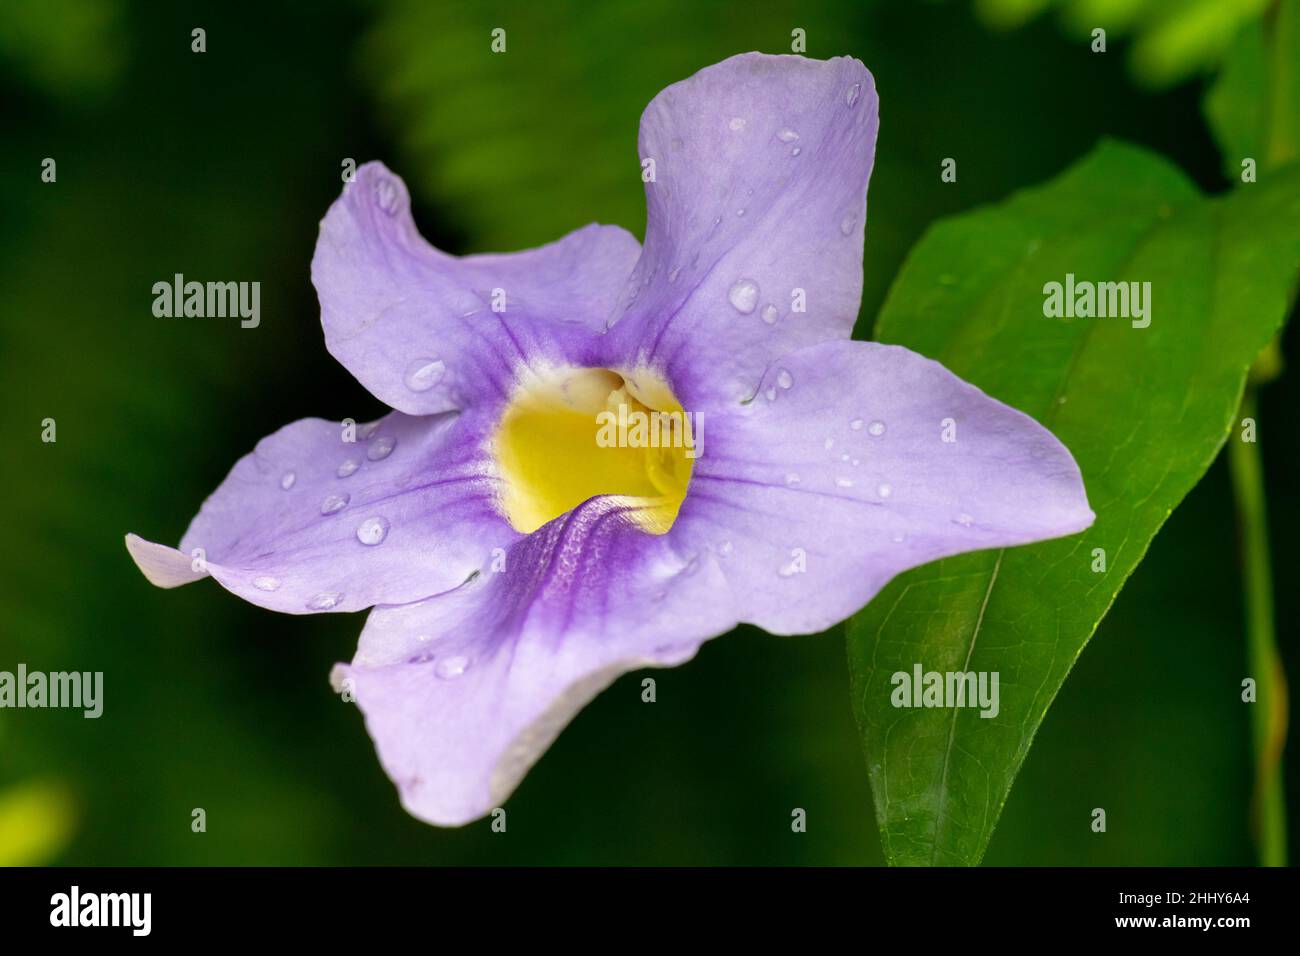 Thunbergia battiscombei flower in close-up view. Stock Photo